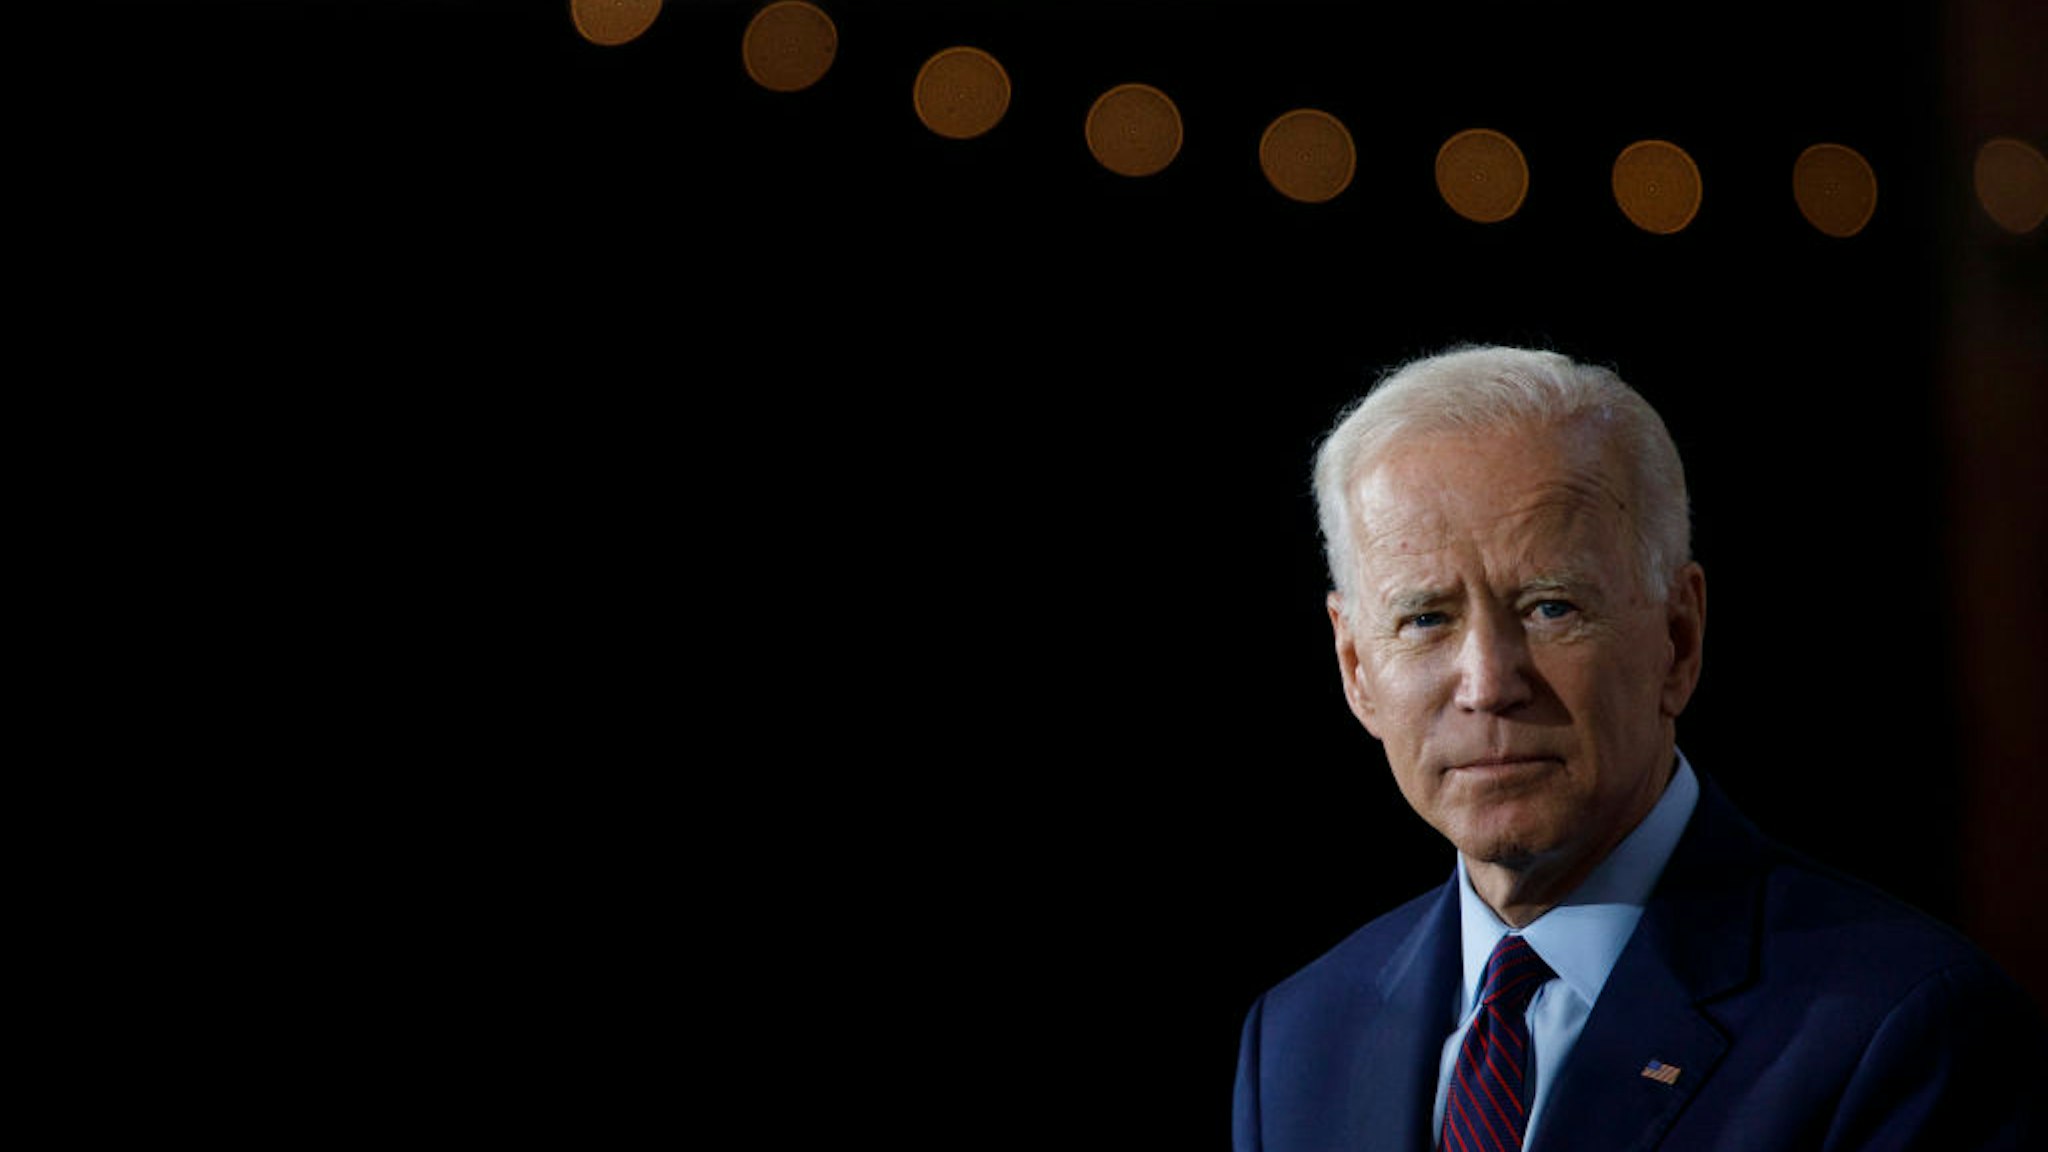 BURLINGTON, IA - AUGUST 07: Democratic presidential candidate and former U.S. Vice President Joe Biden delivers remarks about White Nationalism during a campaign press conference on August 7, 2019 in Burlington, Iow